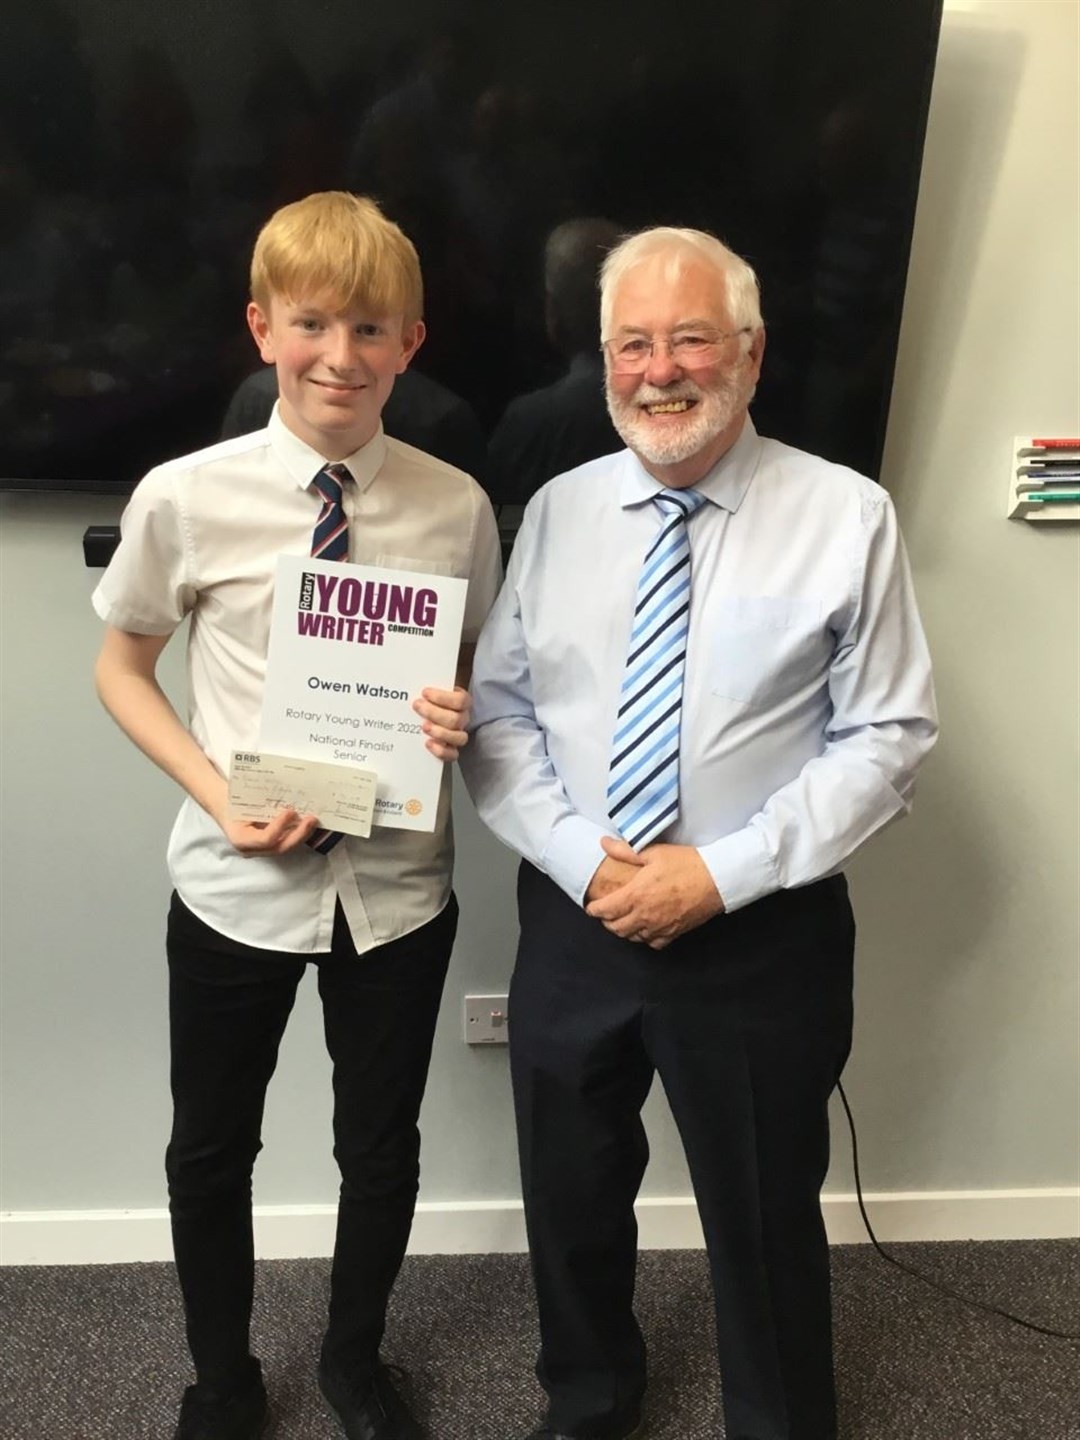 North of Scotland's Rotary Young Writer of the year Owen Watson won across 15 Rotary clubs for his work, titled Environment.